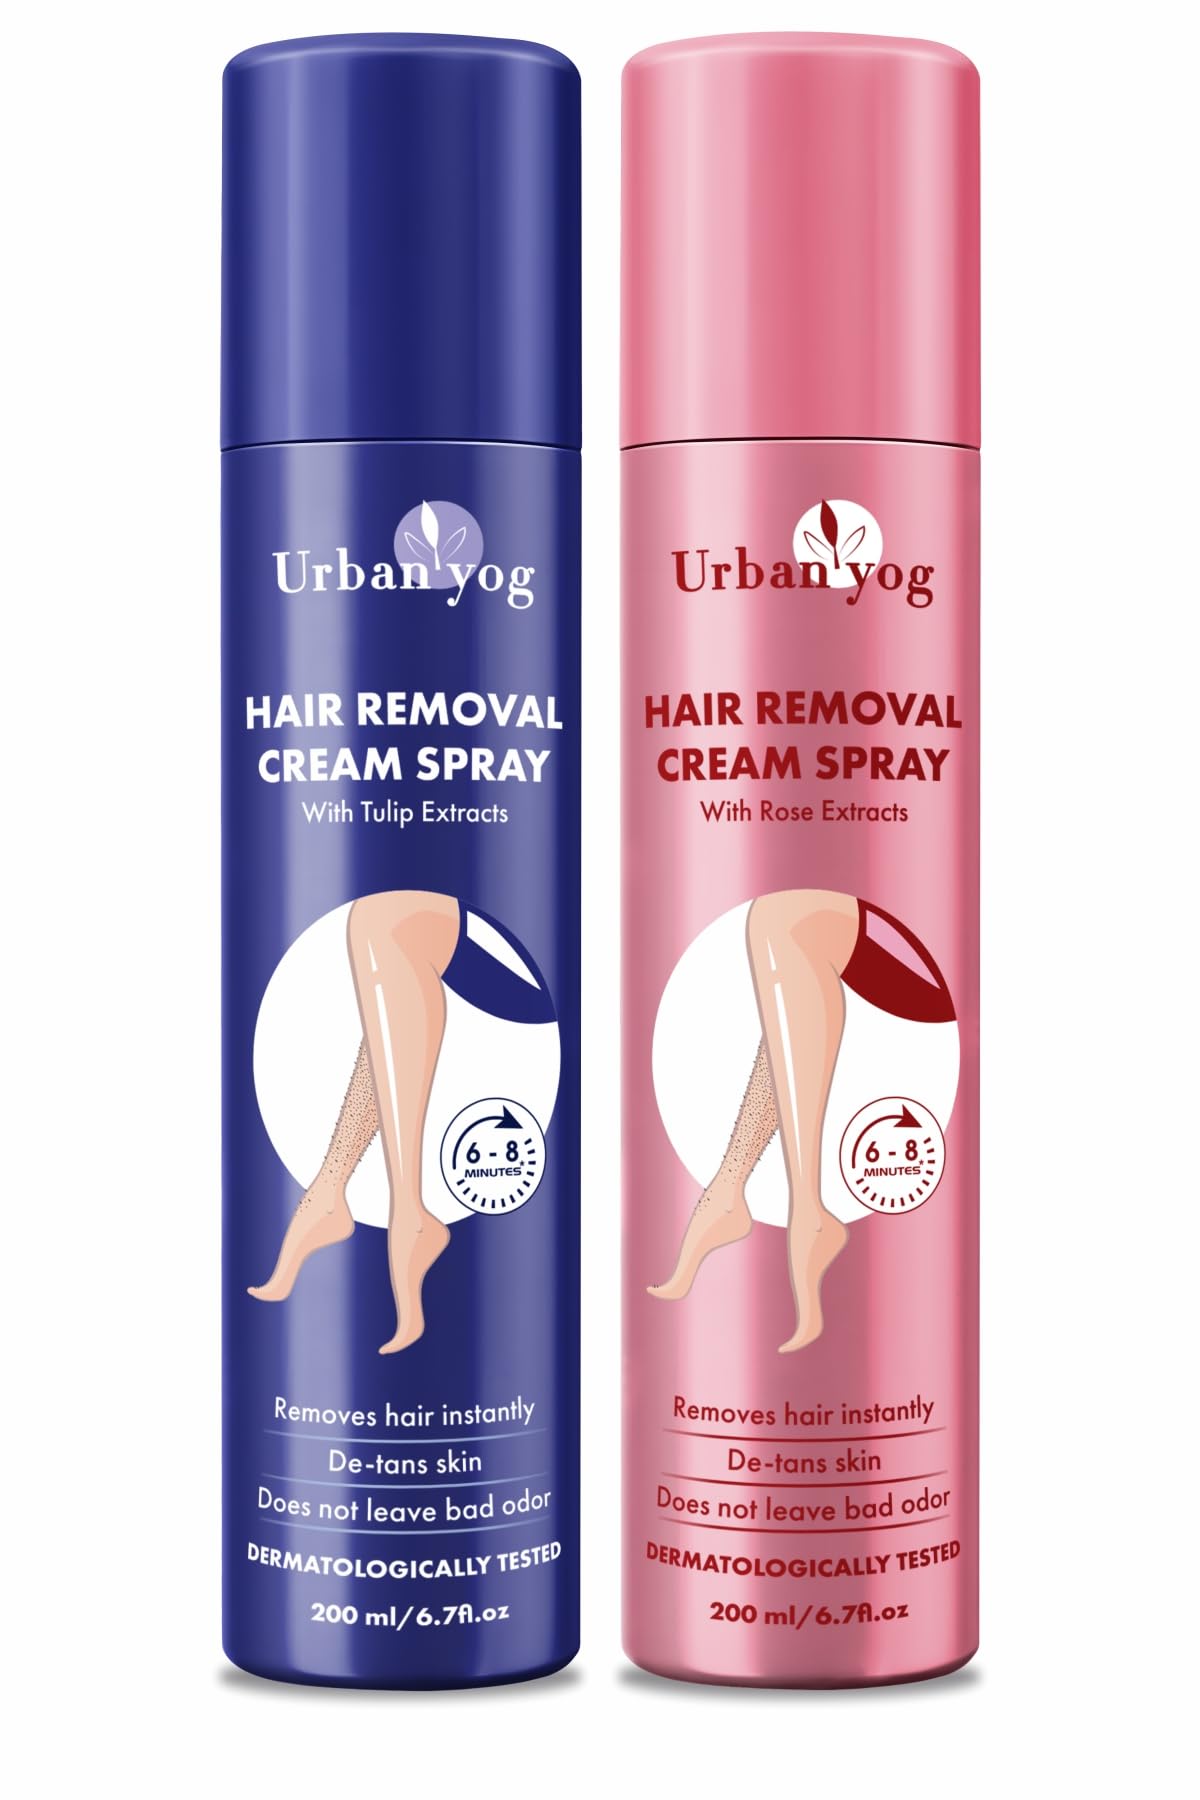 Urban Yog Hair Removal Cream Spray for Women (200 ML * 2 Units) | Combo Flavor - Tulip and Rose | Painless Body Hair Removal Cream